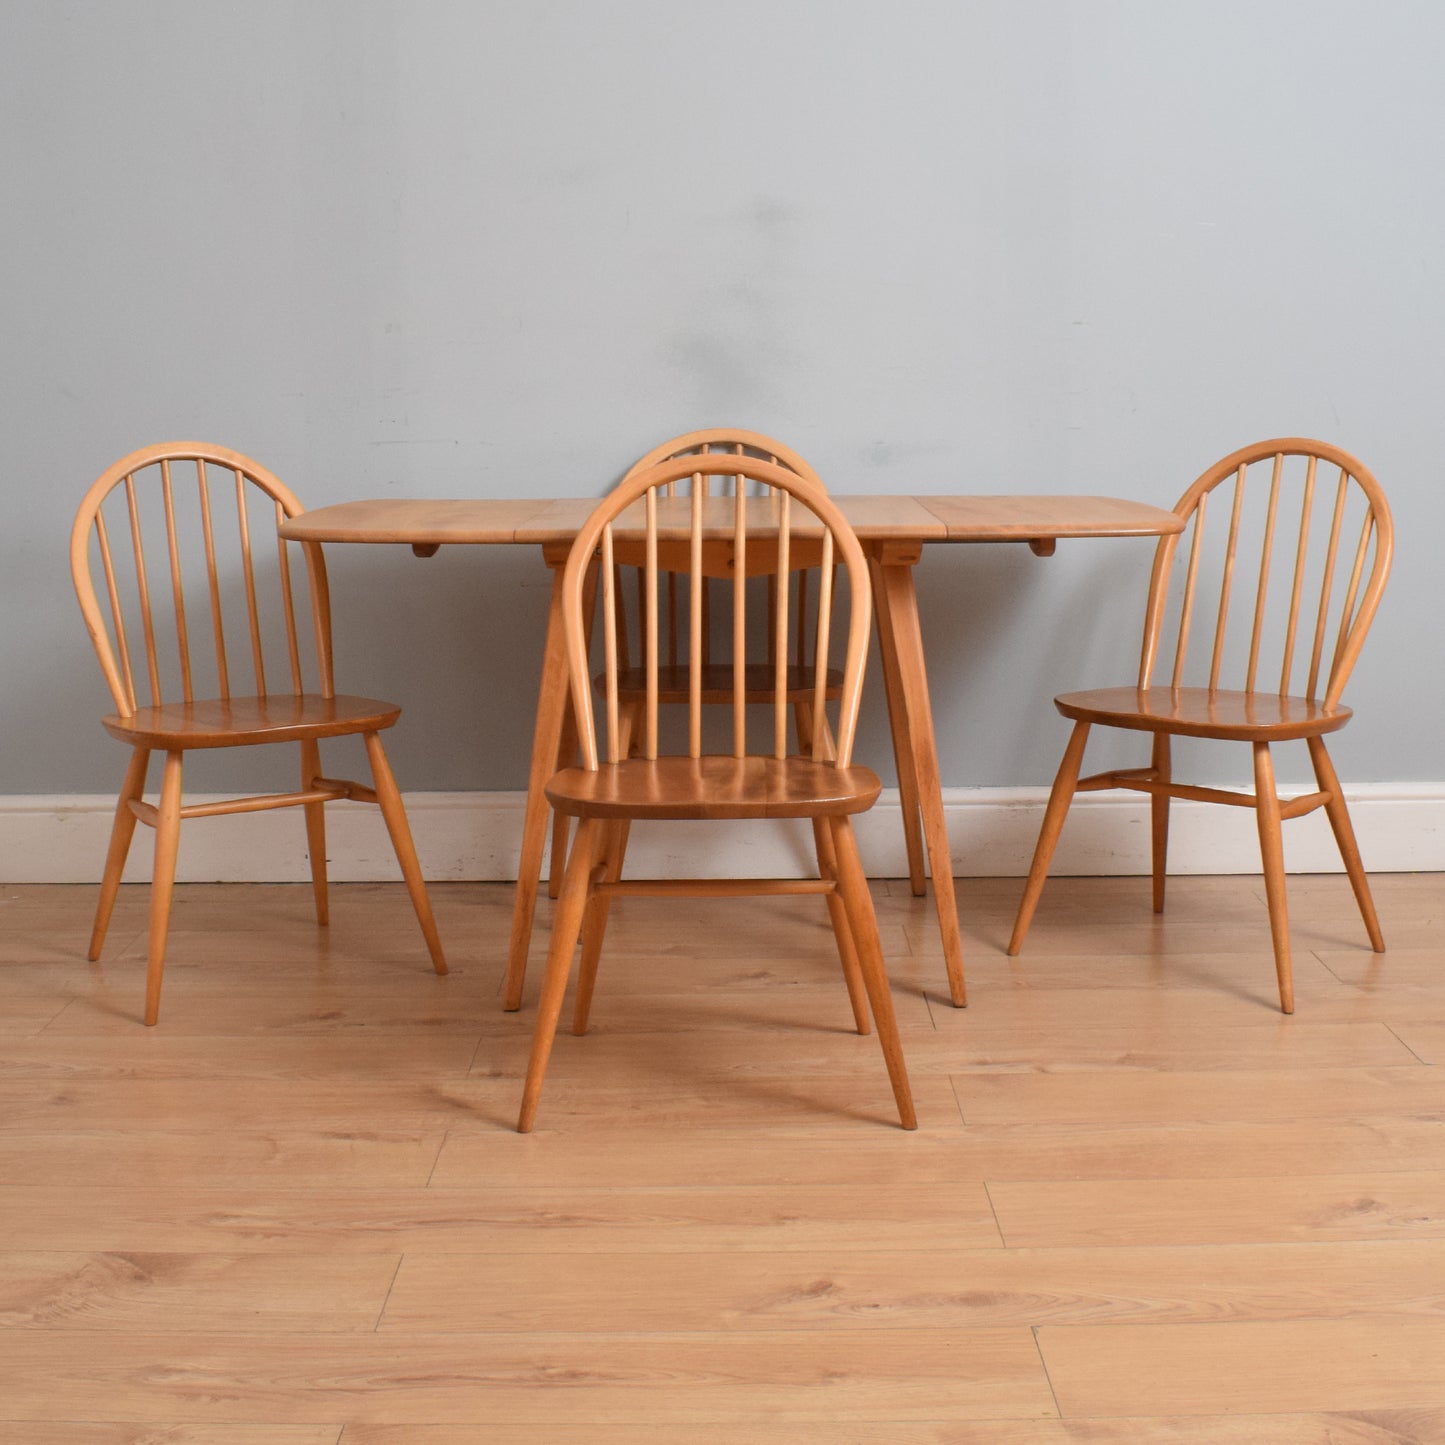 Ercol Model 383 Table and Four Chairs